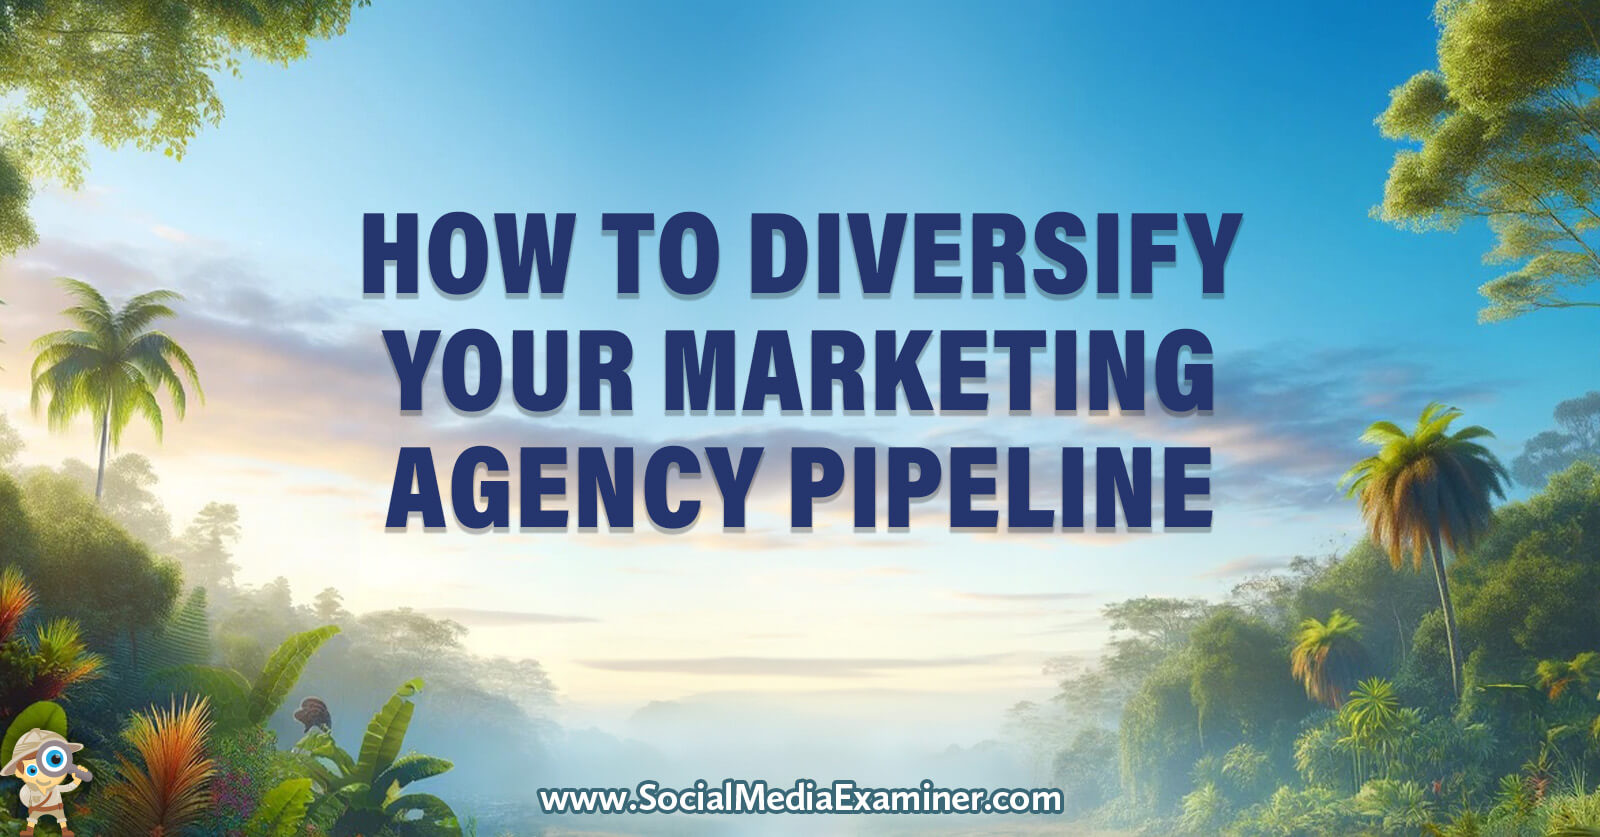 How to Diversify Your Marketing Agency Pipeline by Social Media Examiner